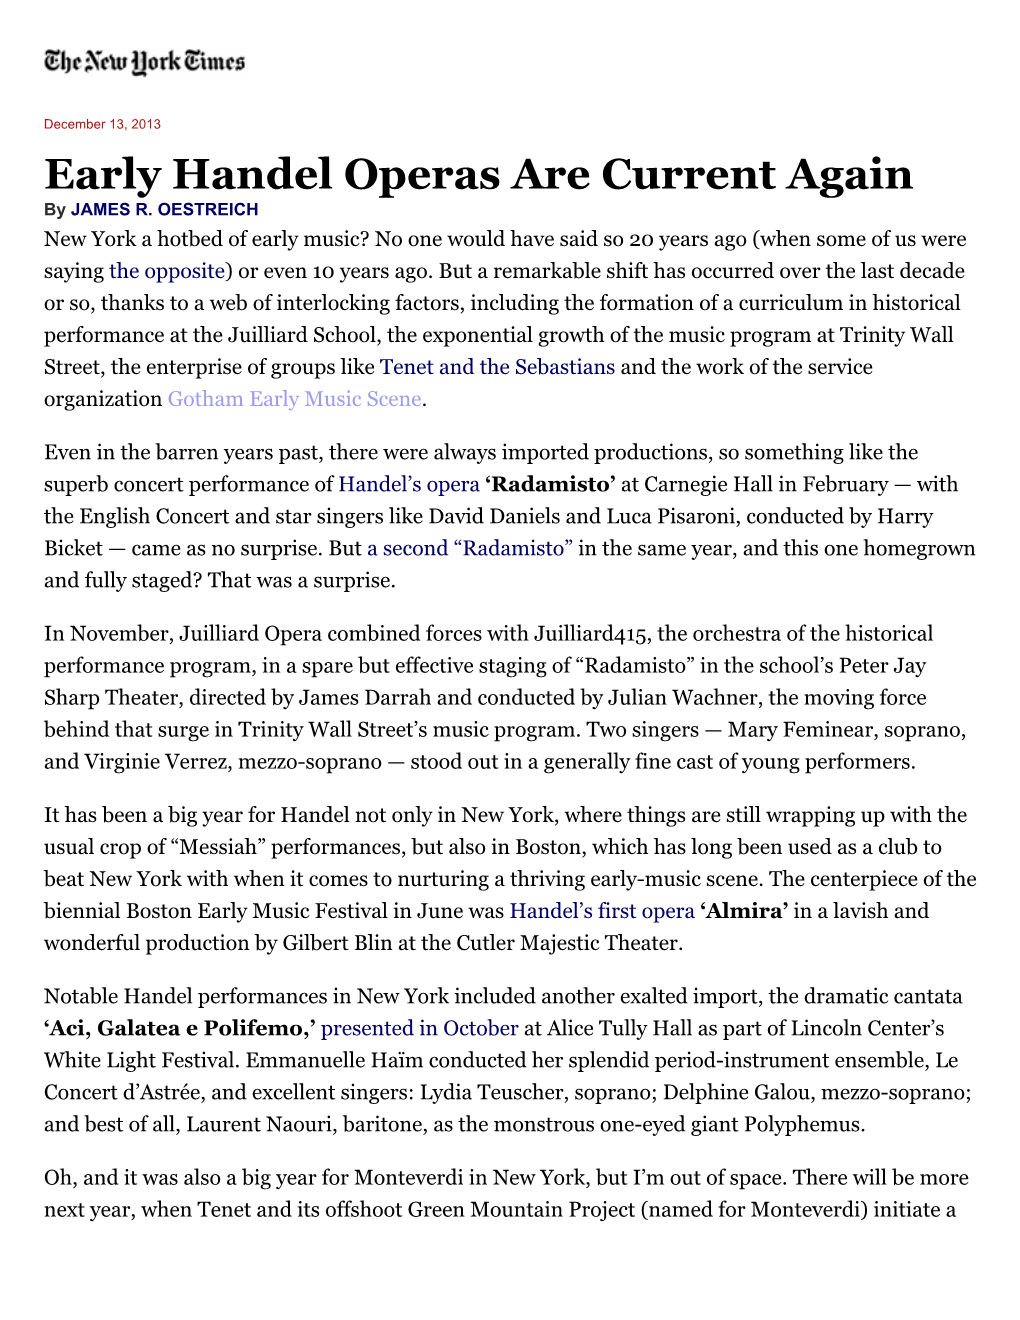 Early Handel Operas Are Current Again by JAMES R